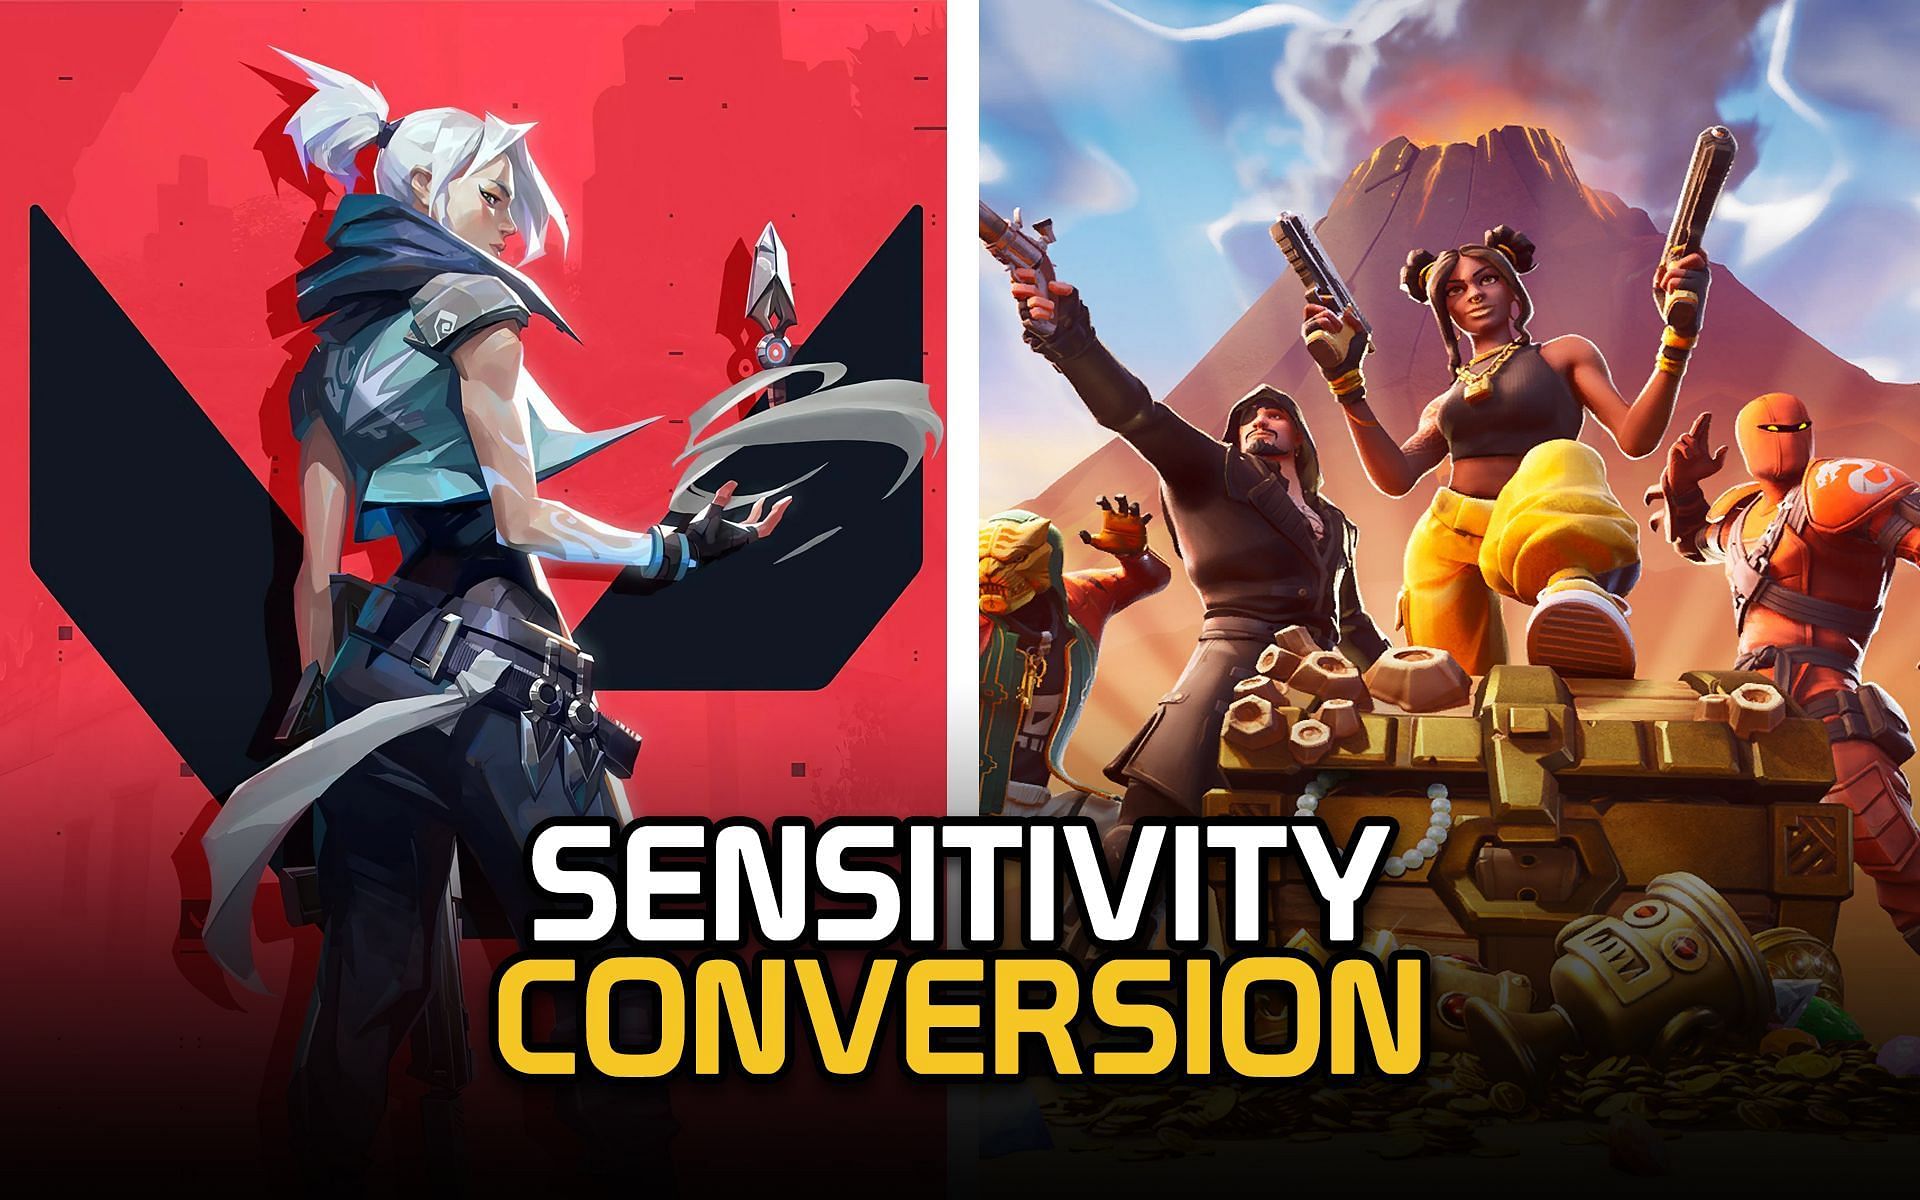 Valorant sensitivity can be brought over to and adjusted in Fortnite (Image via Sportskeeda)